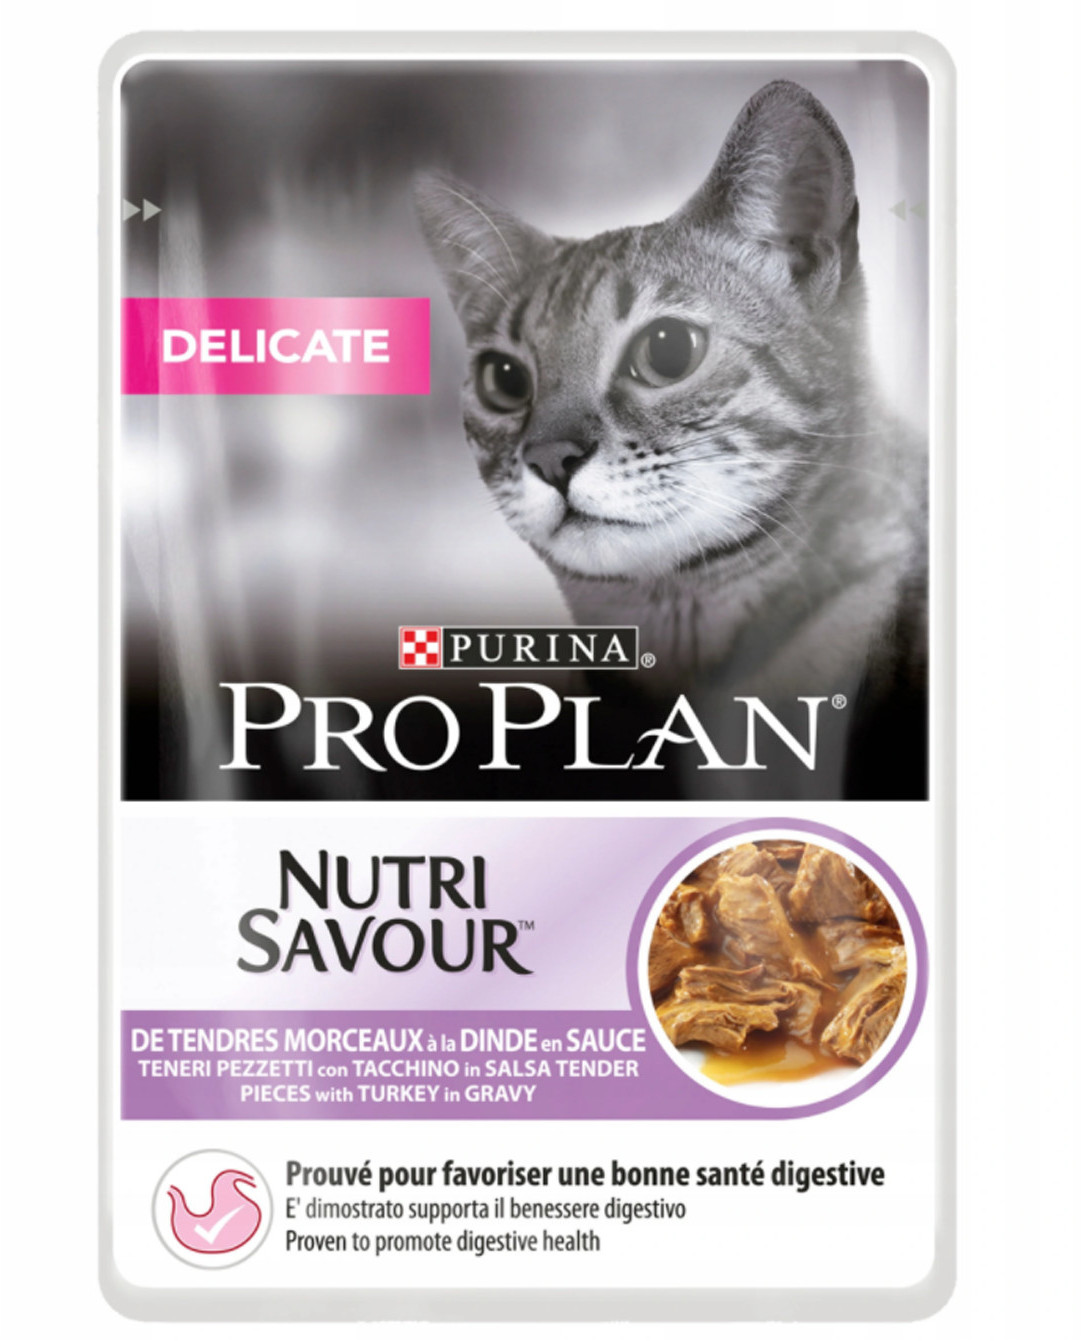 Purina PRO PLAN DELICATE Indyk 85g CL5LGX421UD